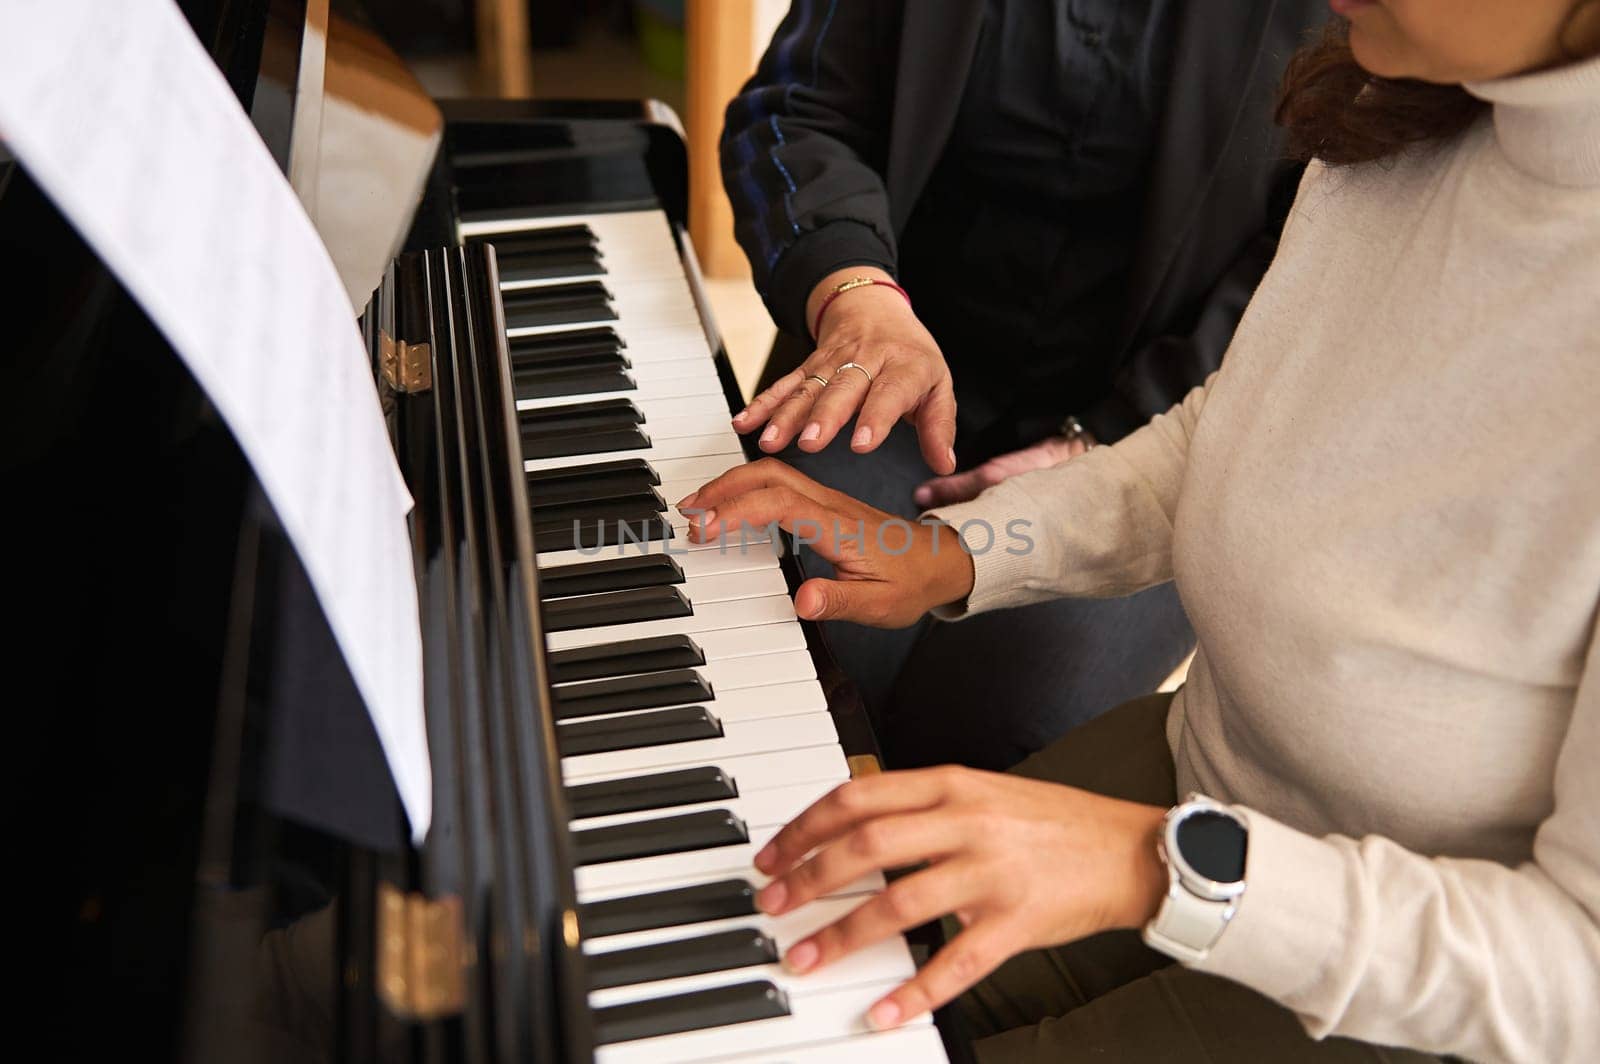 Close-up view of women hands playing piano indoor during music lesson. Female pianist teacher explaining piano lesson, touching white and black piano keys, performing classical music composition